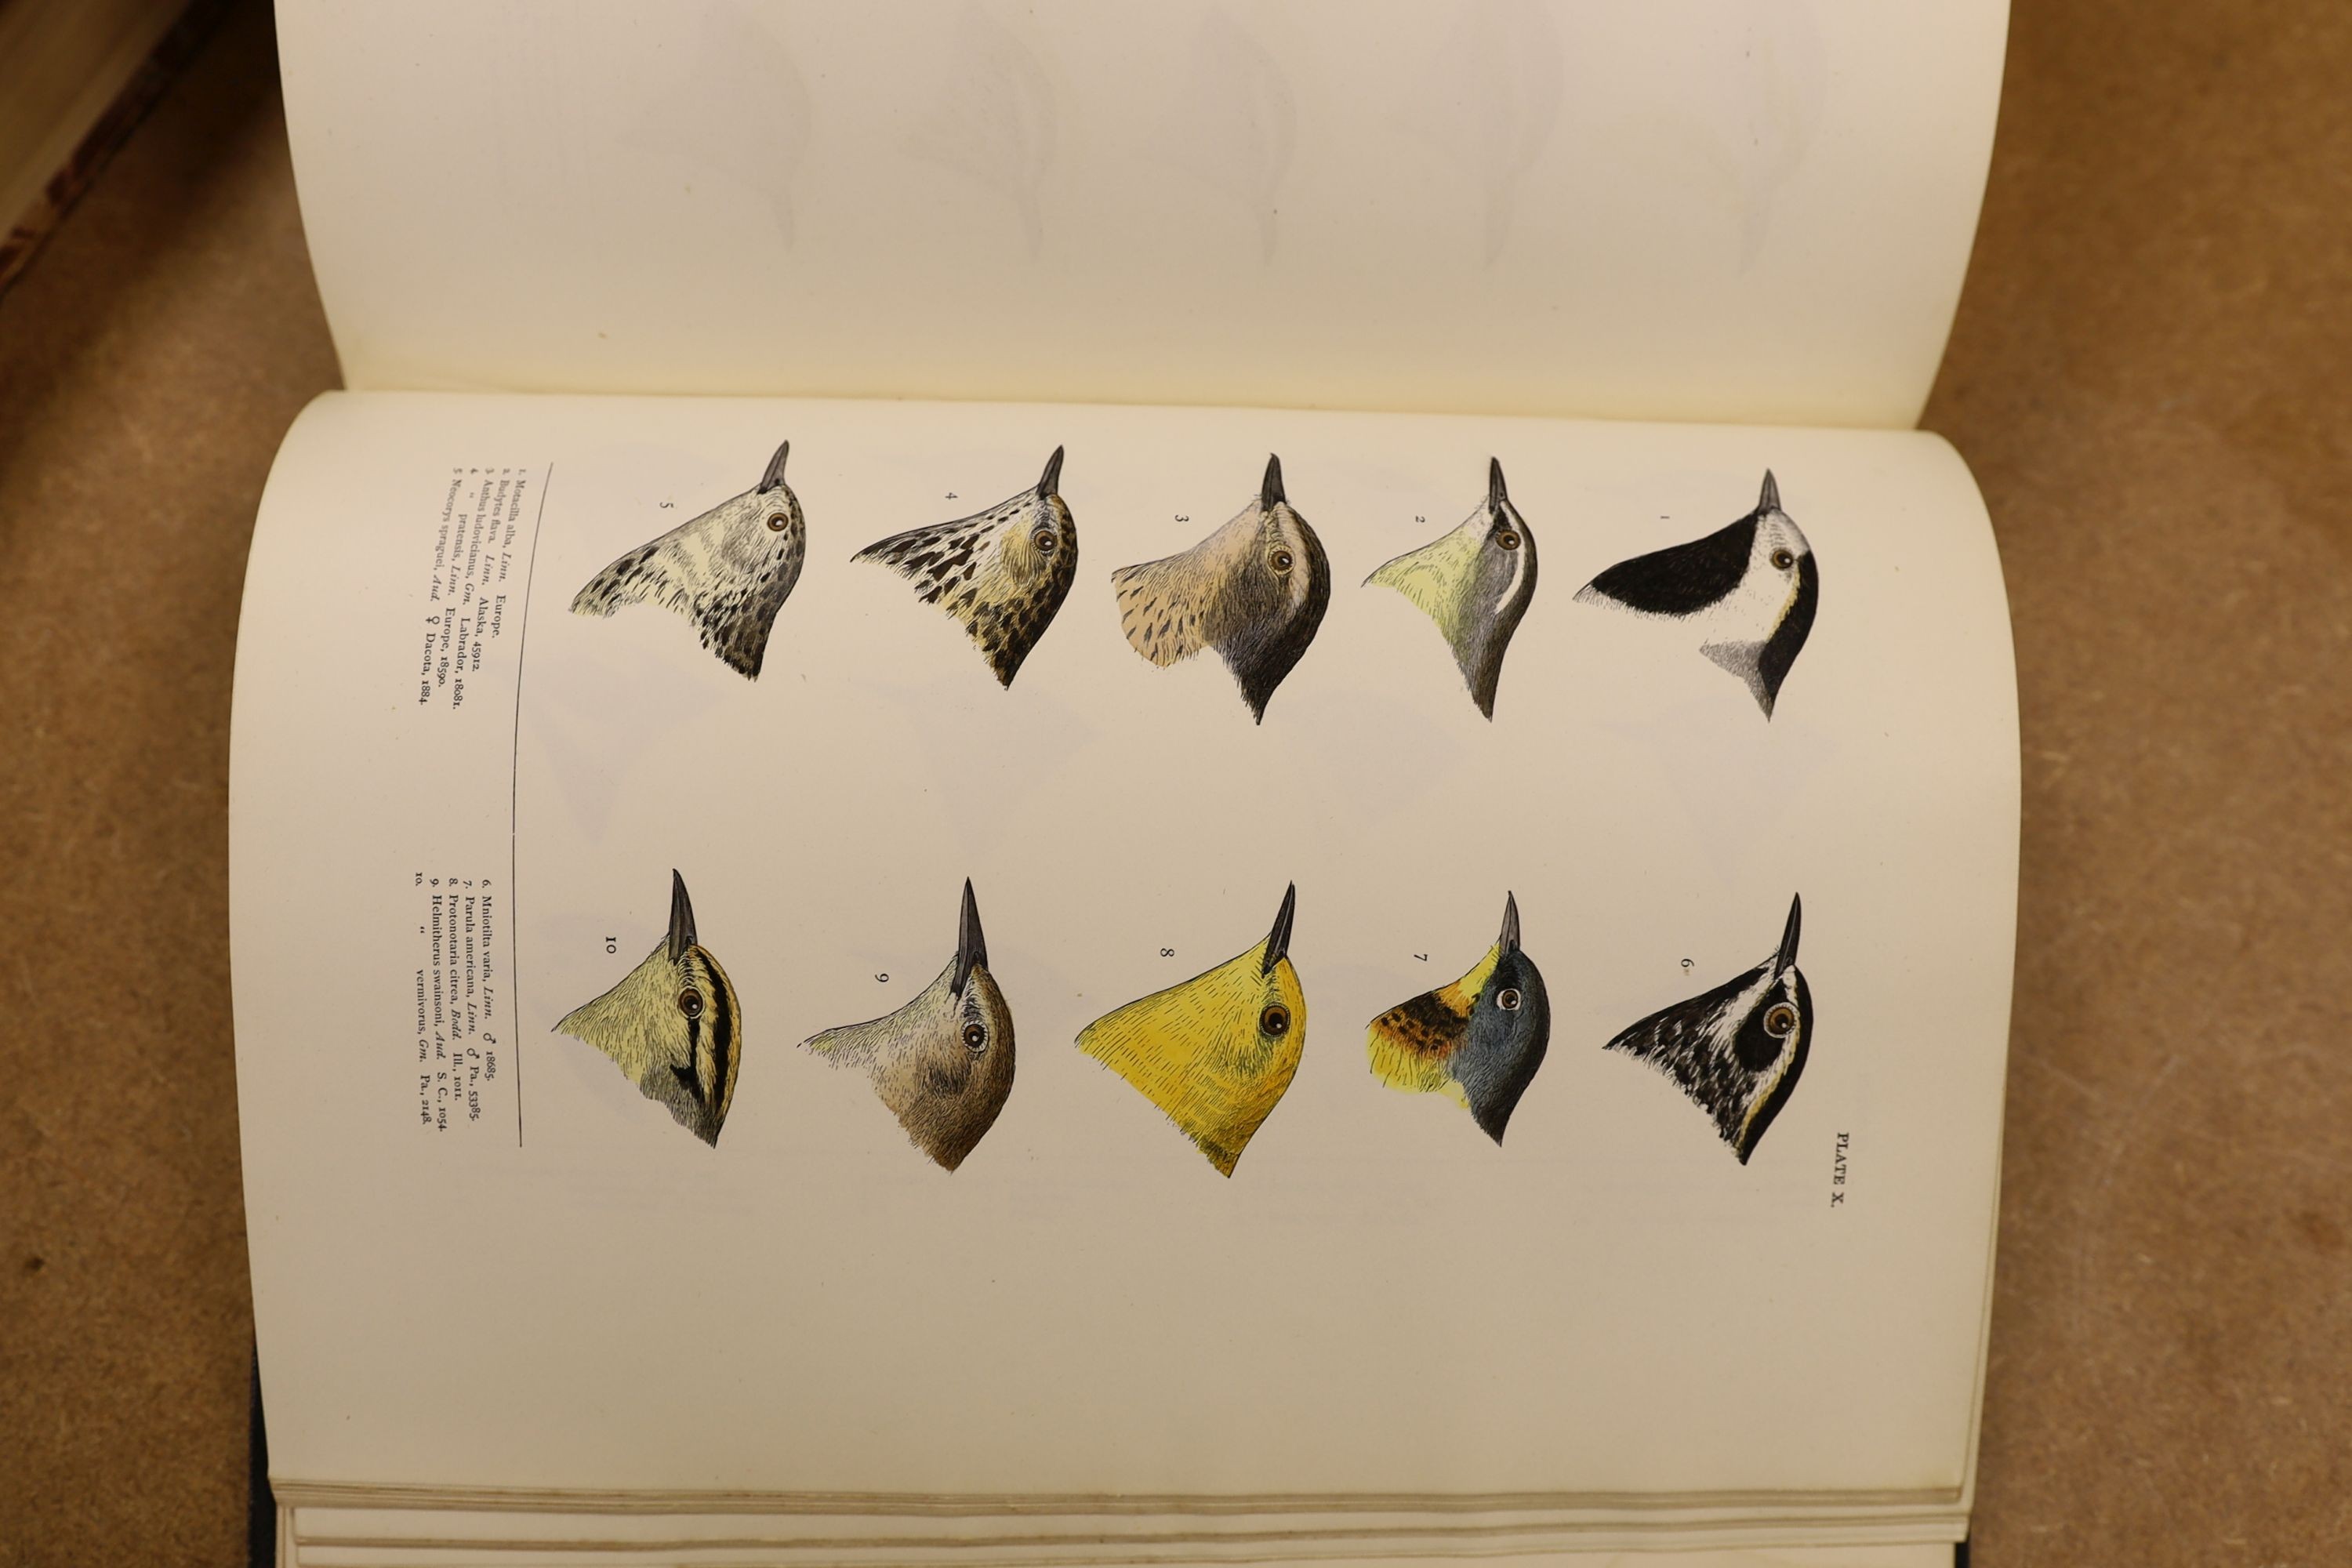 Baird, S.F. & Others - A History of North America Birds: Land Birds, 3 vols., coloured plates and other illus.; old half leather and marbled boards, gilt tops and marbled e/ps., 4to.